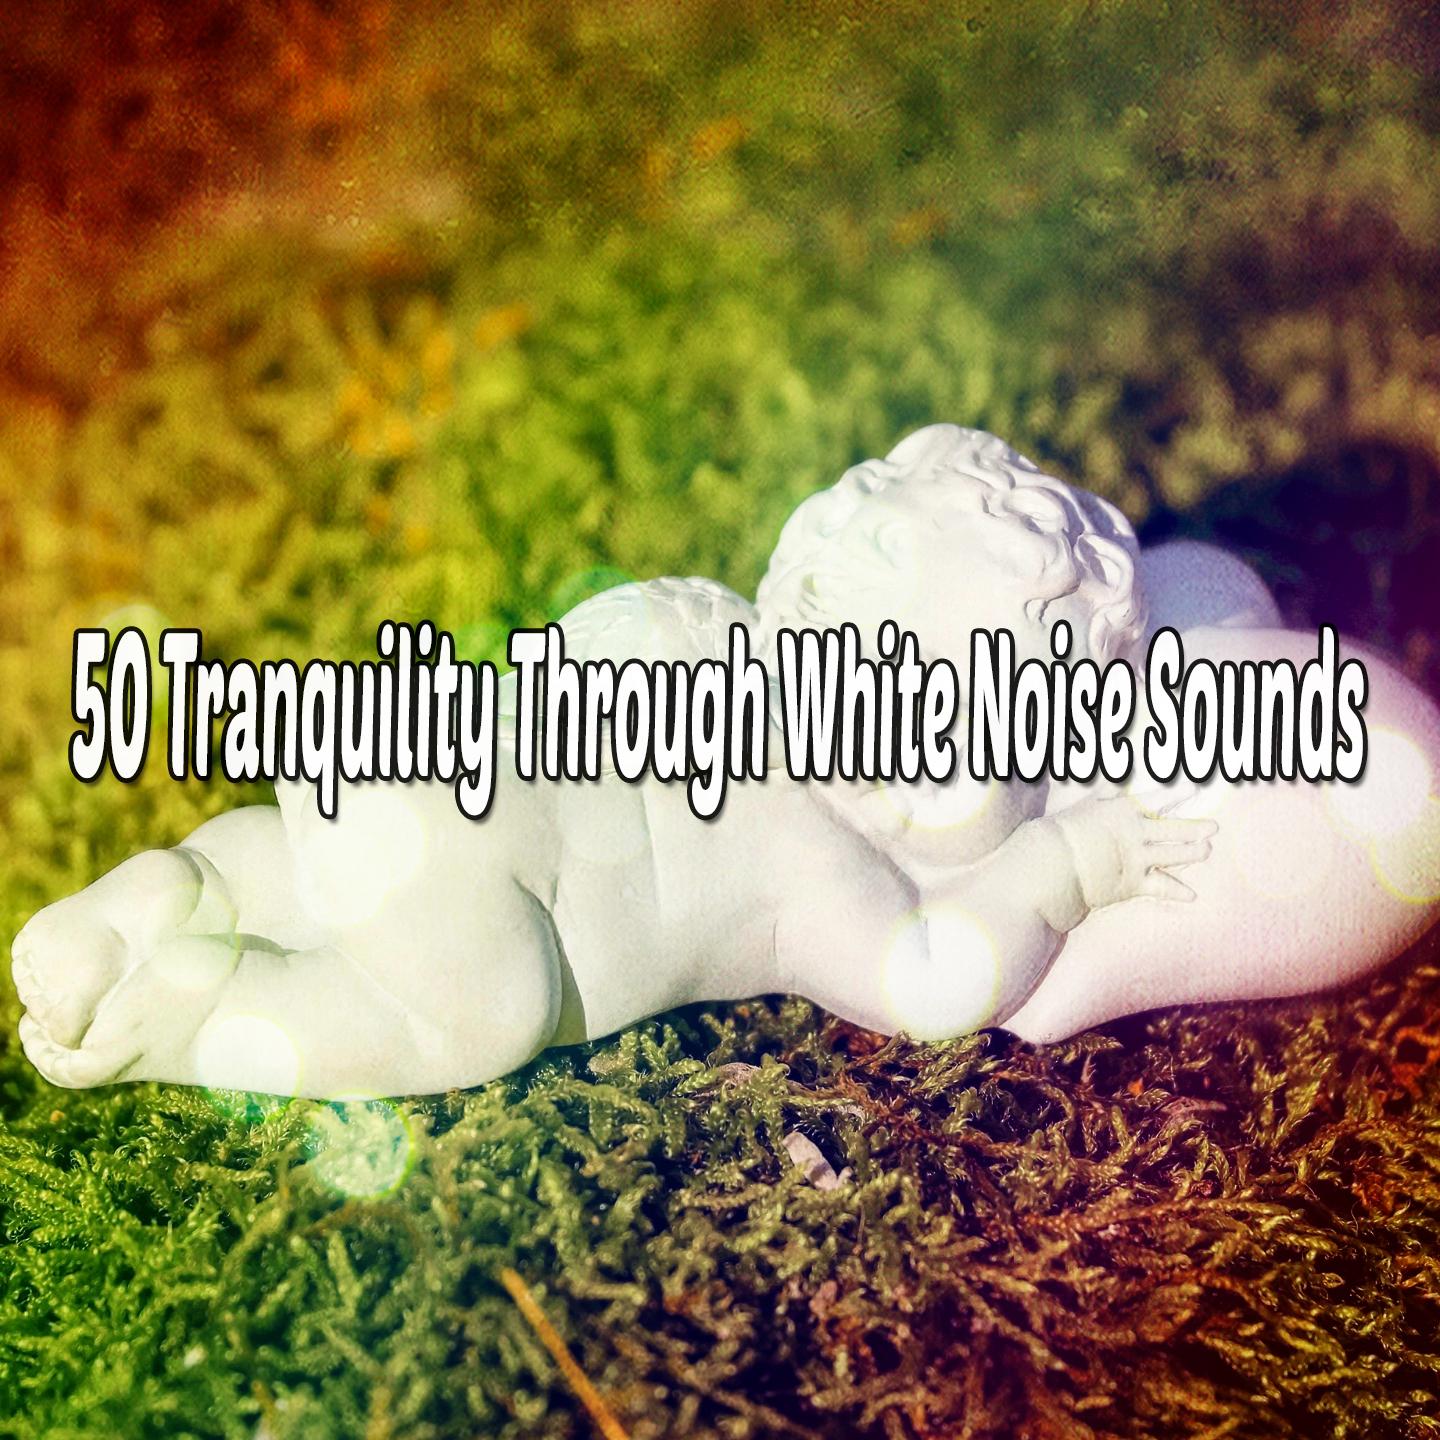 50 Tranquility Through White Noise Sounds